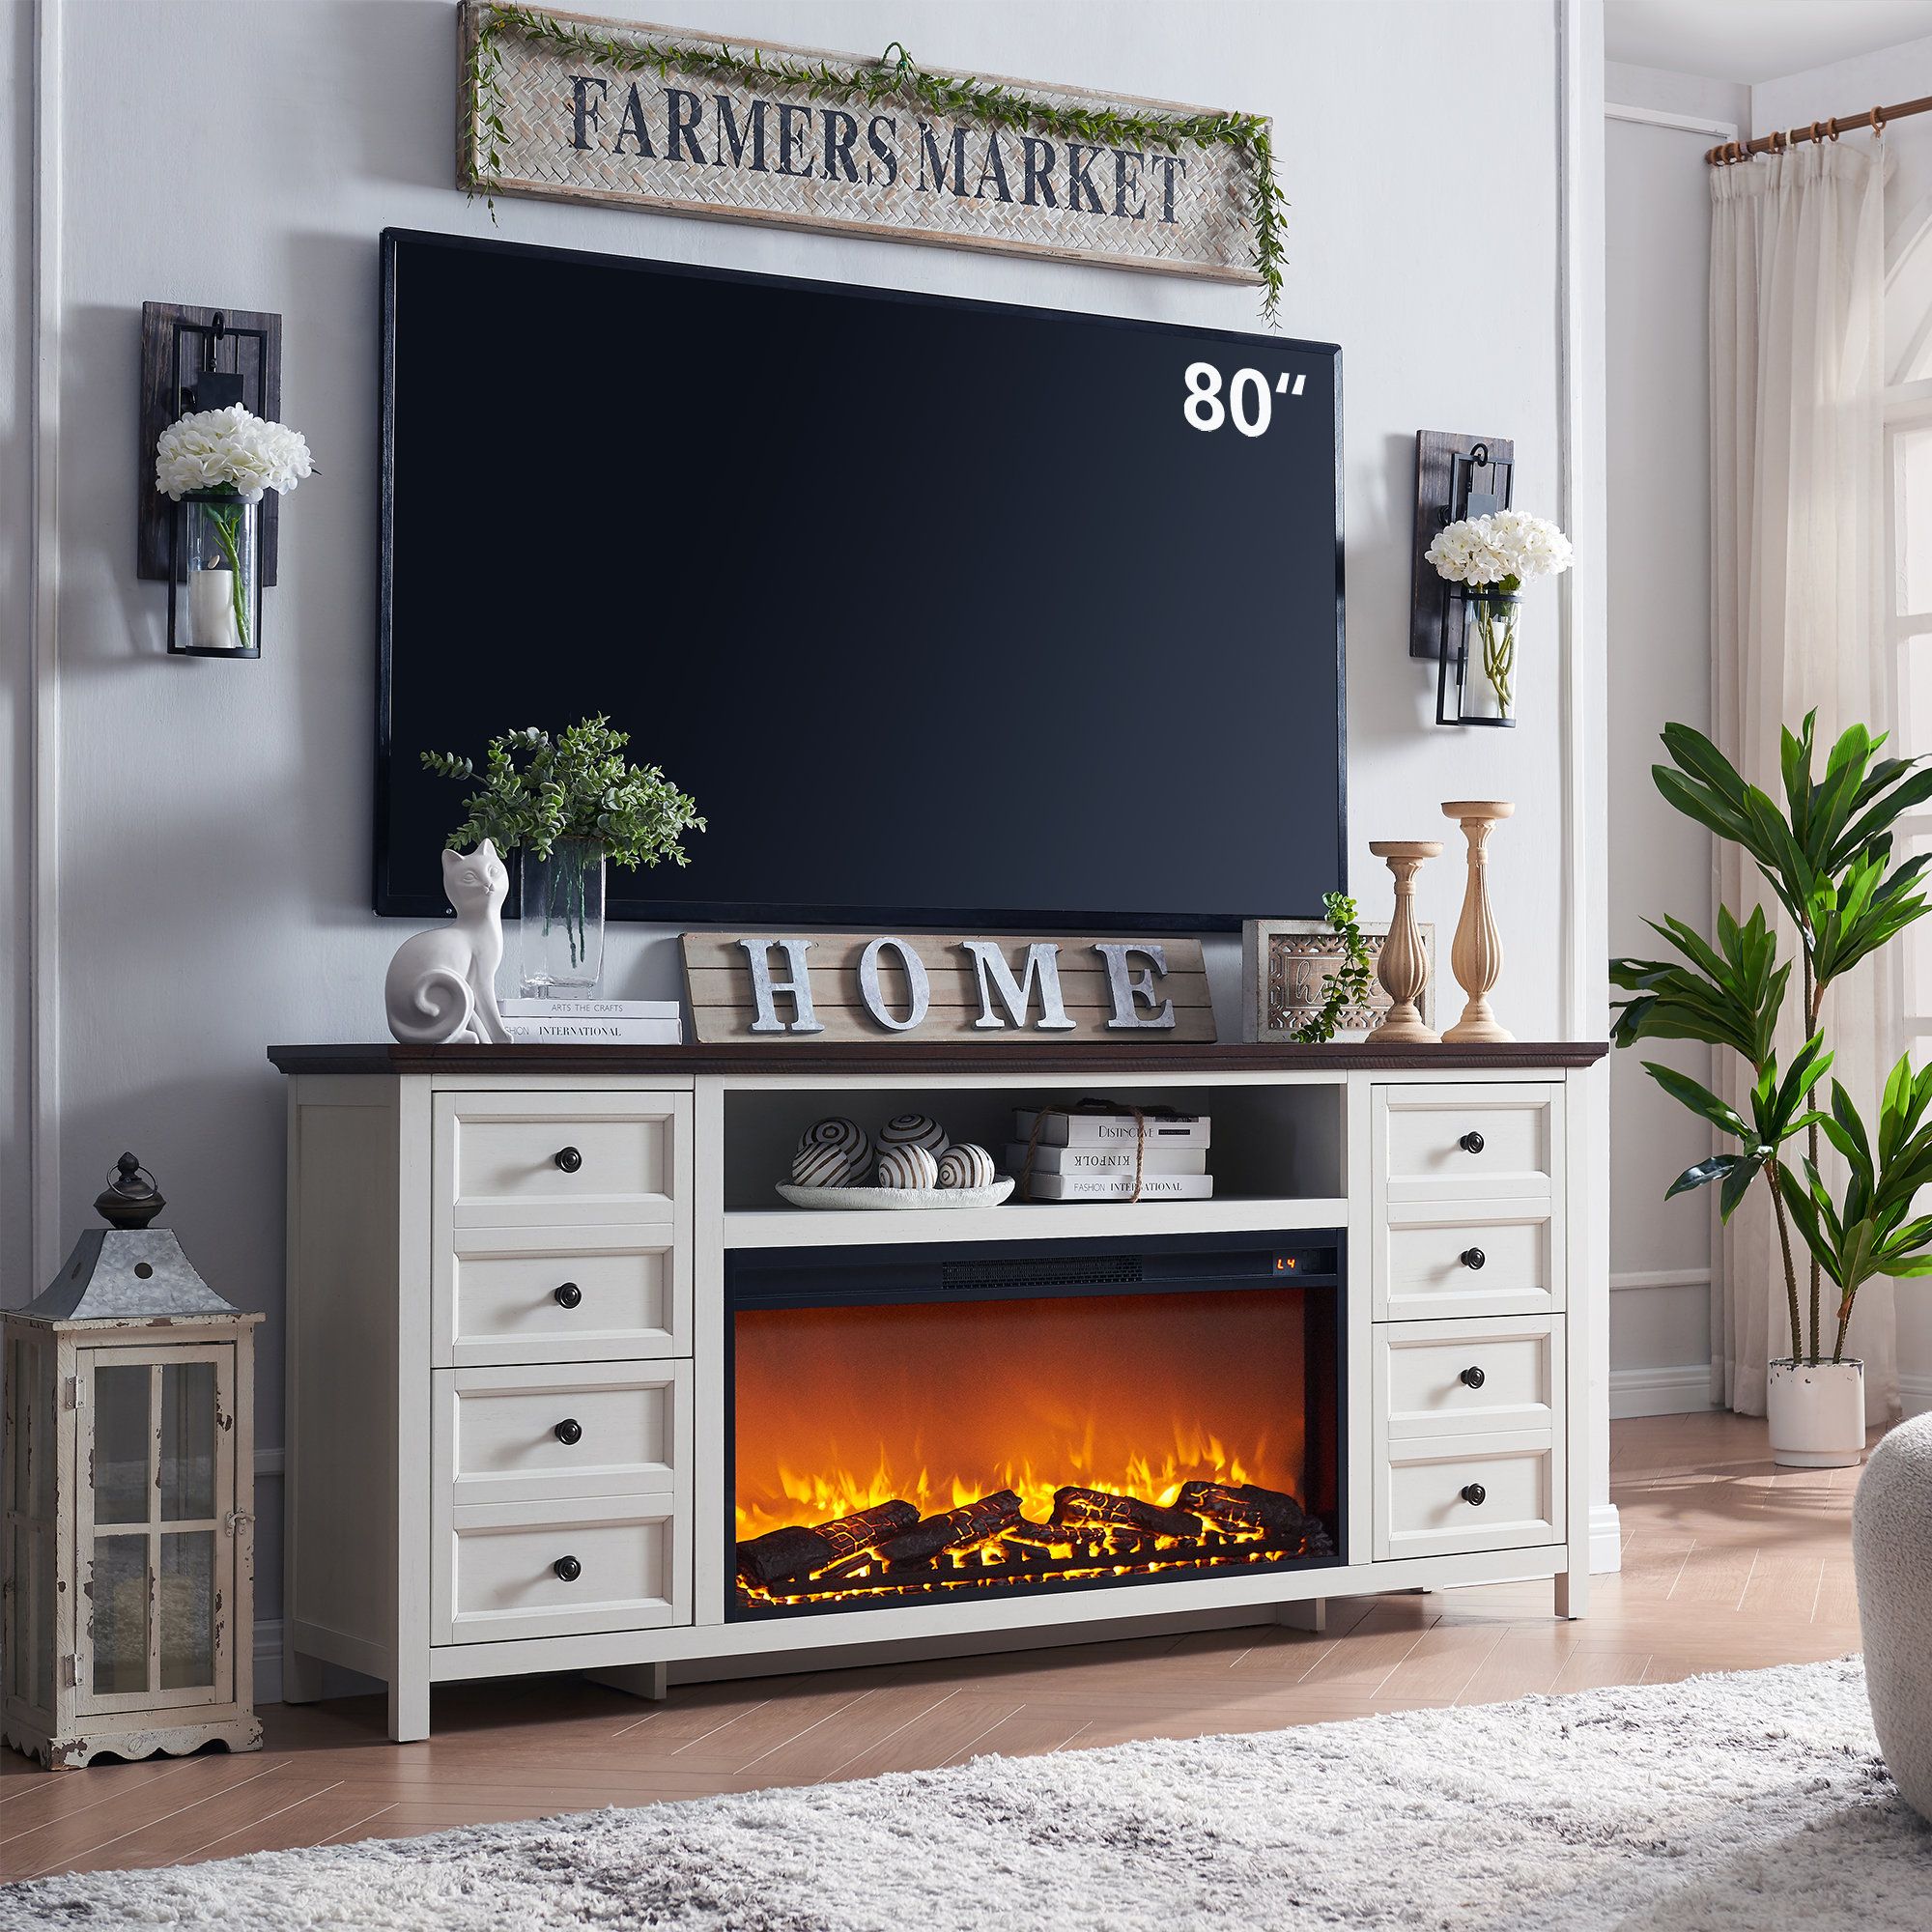 Red Barrel Studio® Conogher Tv Stand For Tvs Up To 80" With Electric  Fireplace Included & Reviews | Wayfair Intended For Tv Stands With Electric Fireplace (View 15 of 15)